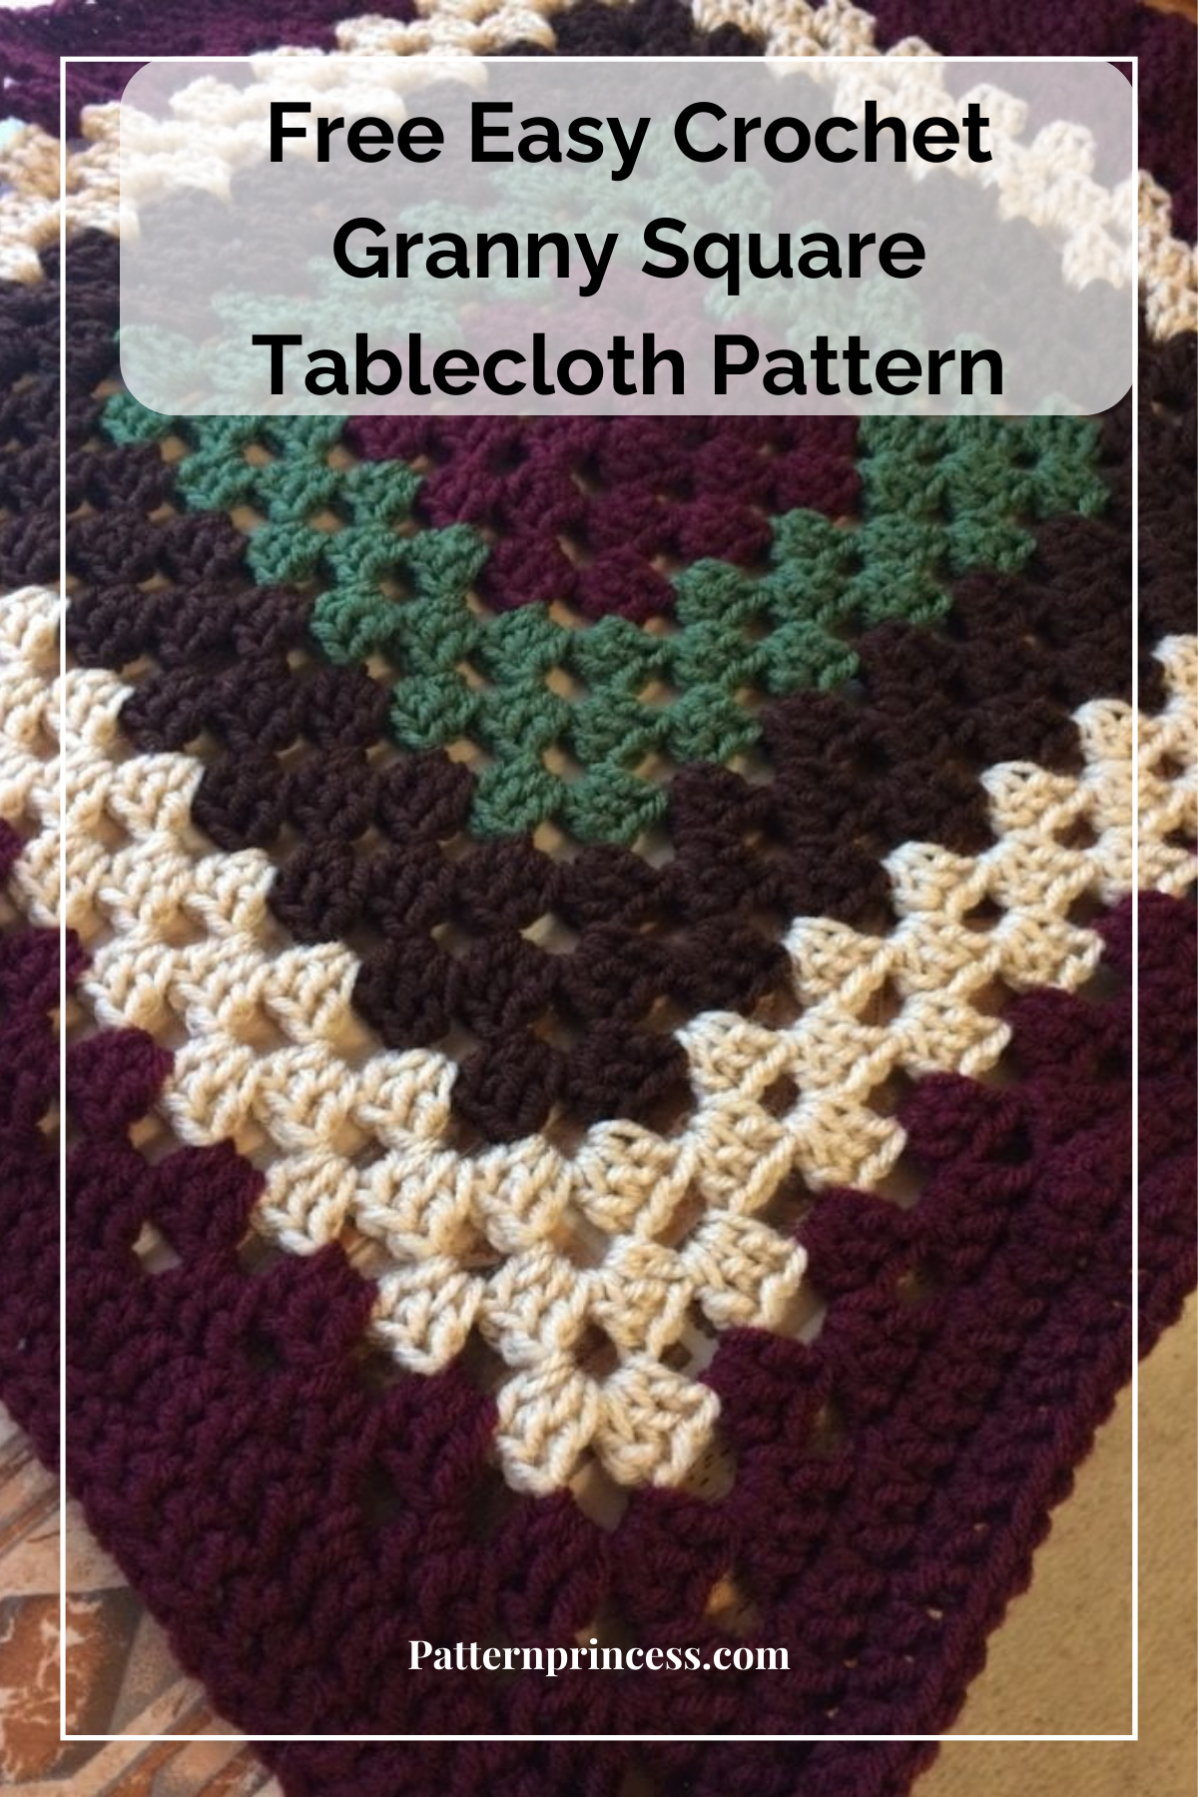 Free Easy Crochet Granny Square Tablecloth Pattern